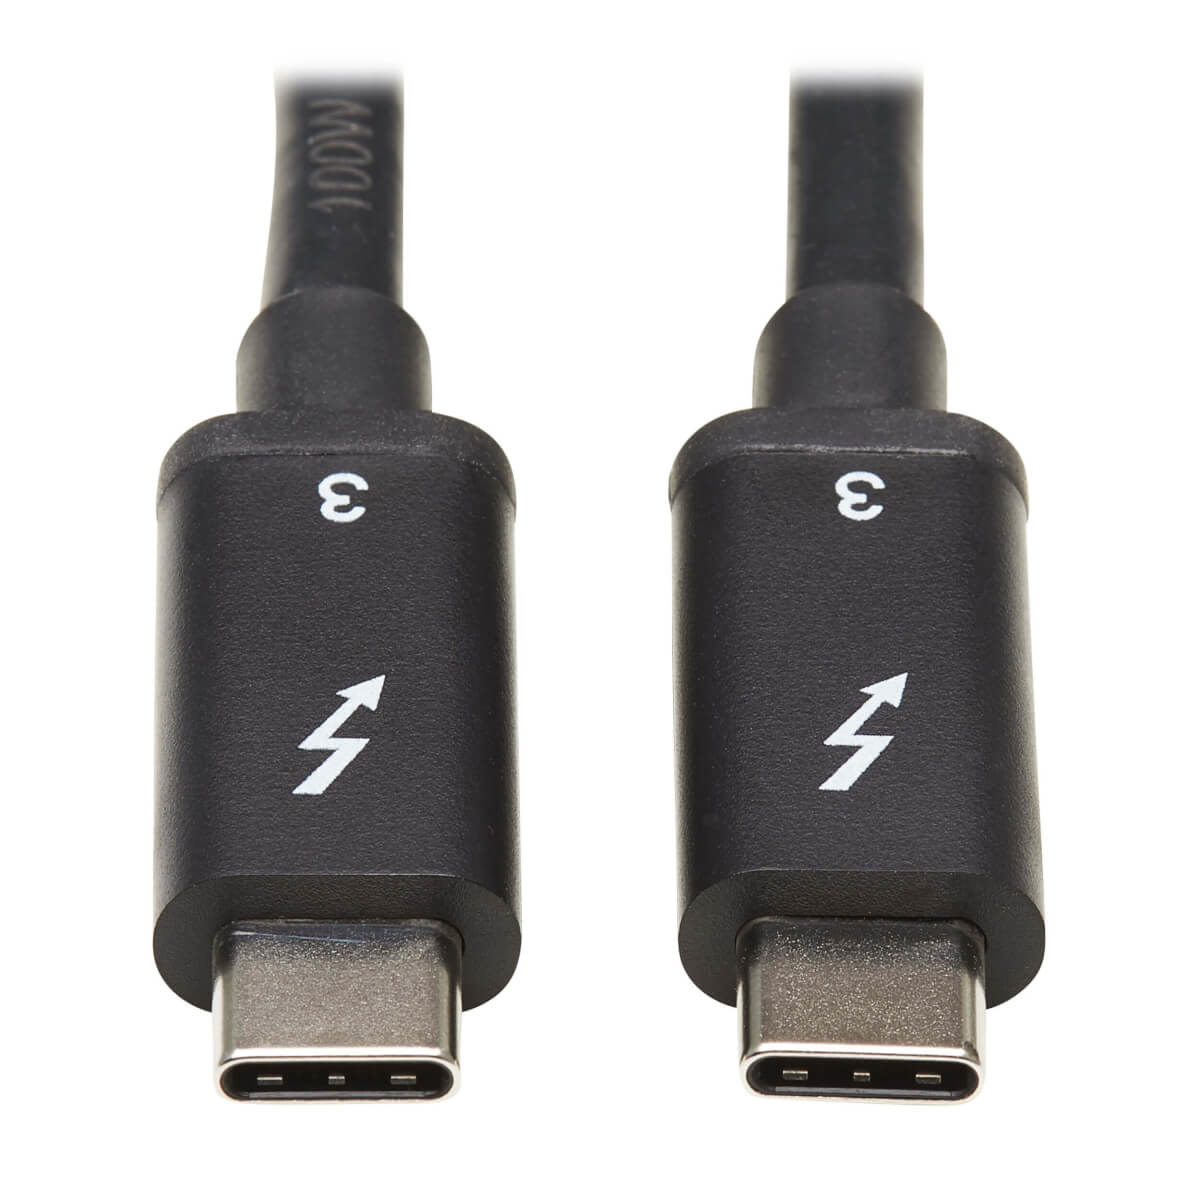 Thunderbolt 3 Cable 40 Gbps Passive 0.5M